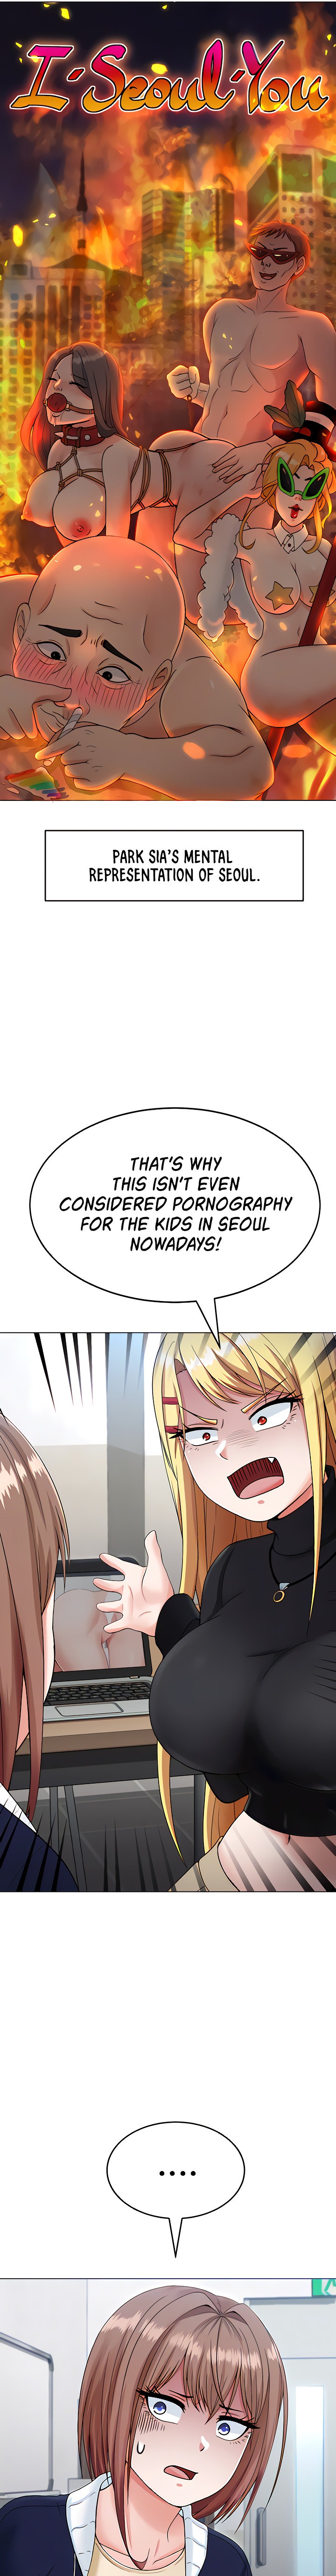 Seoul Kids These Days Chapter 6 - Page 3